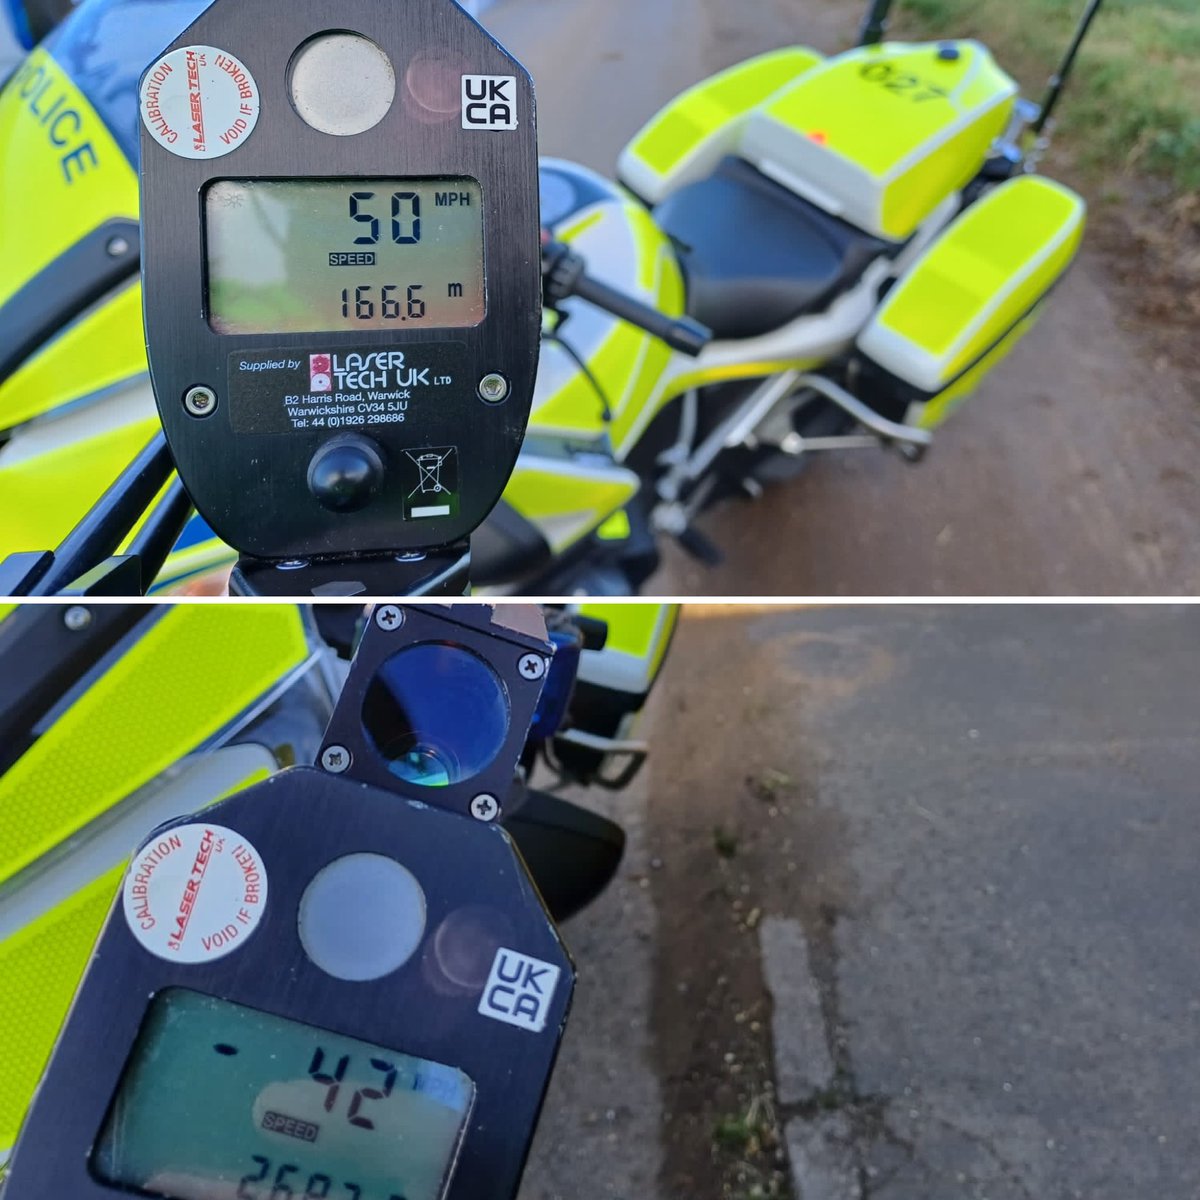 The #RPU bike was out today in the 30mph limit dealing with inappropriate speeders. 
‘I didn’t realise it was a 30….’
#Fatal5 #RoadSafetyWeek